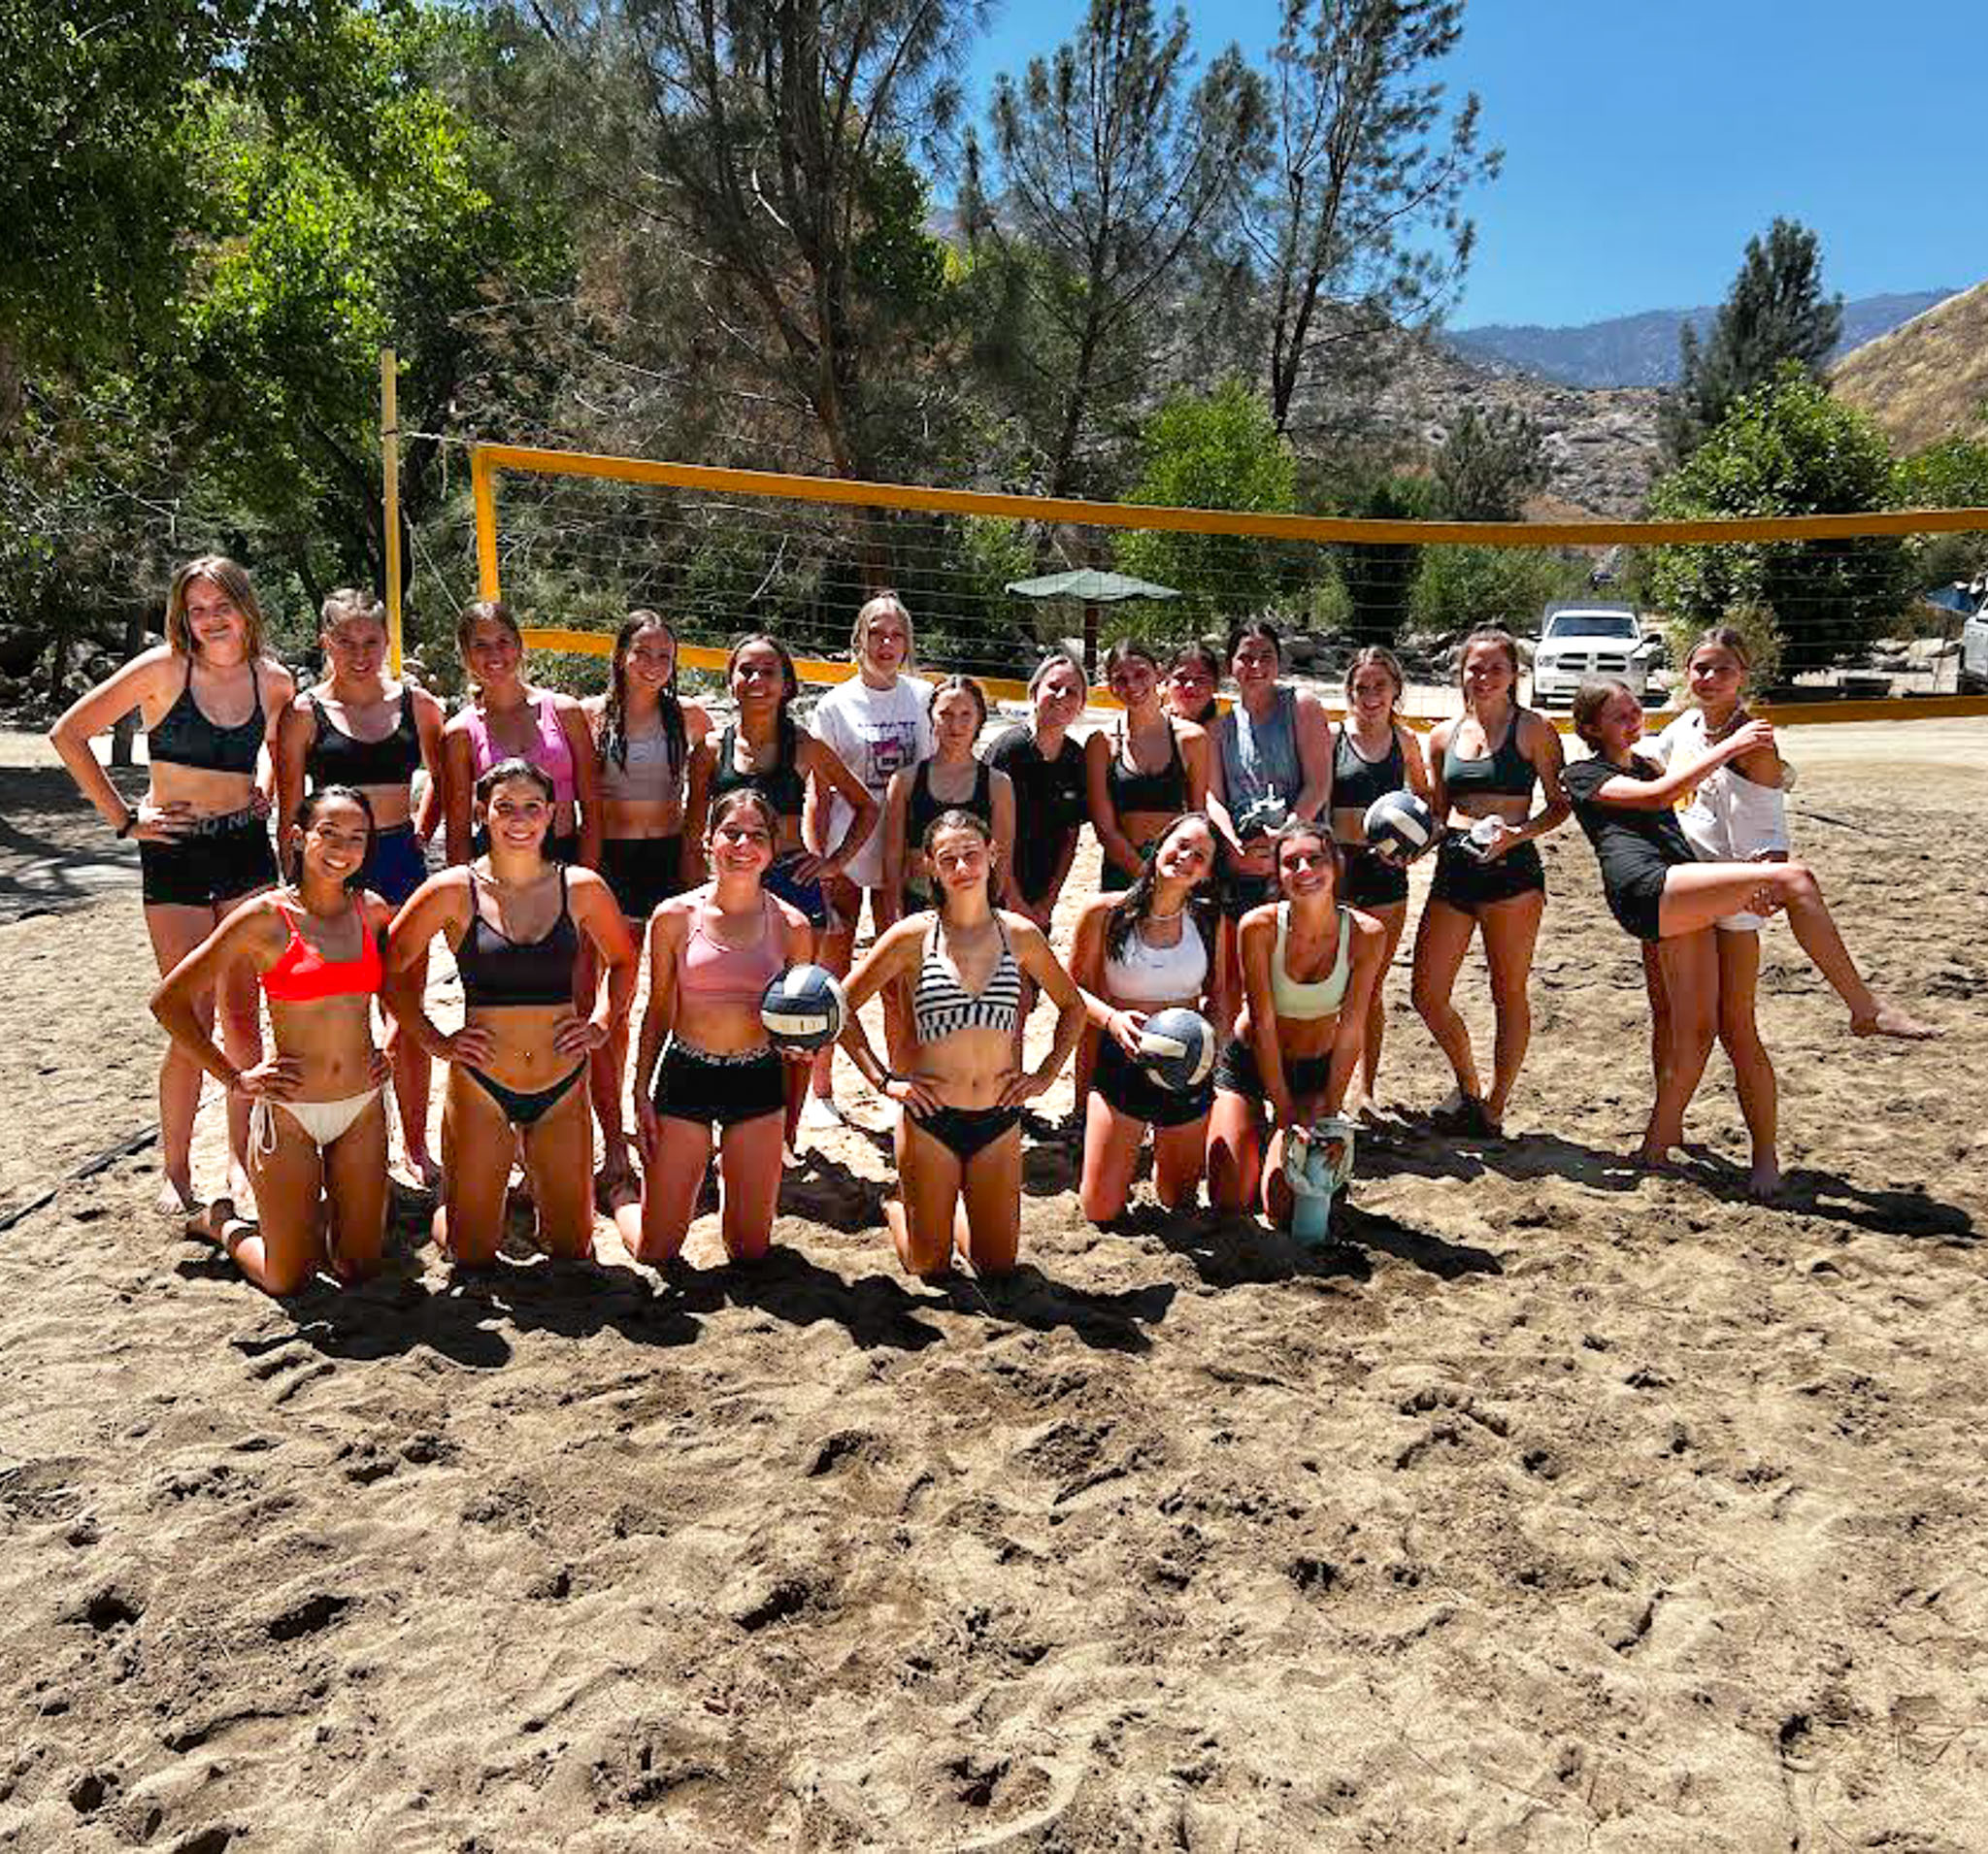 Beach volleyball players looking to improve their skills